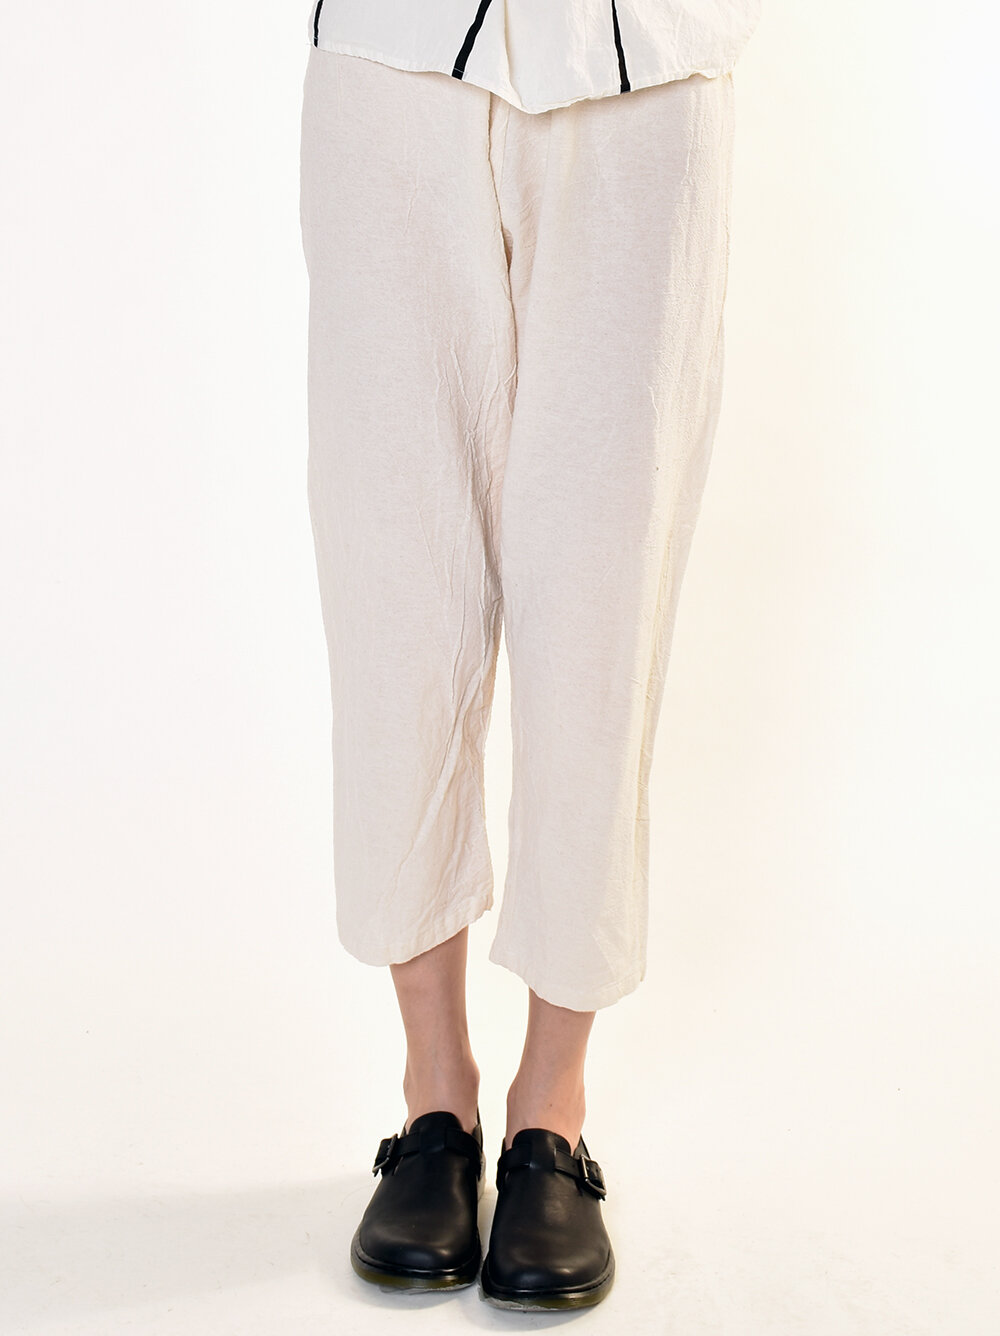 Unisex, comfortable, cotton, cropped pants made in Brooklyn. — uzinyc